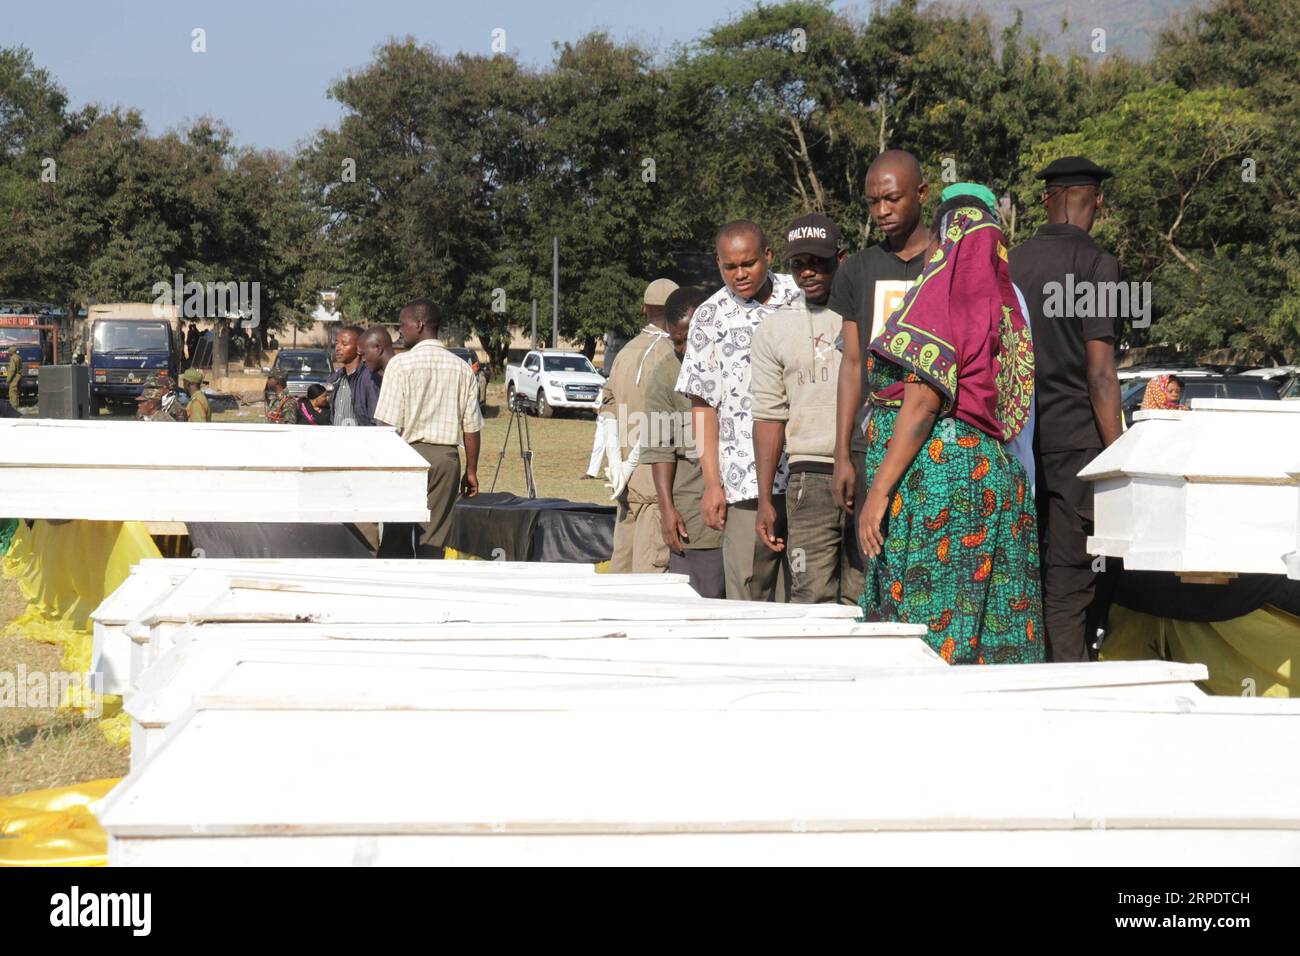 (190811) -- MOROGORO, Aug. 11, 2019 -- People attend a burial ceremony for victims of a tanker explosion in Morogoro, Tanzania on Aug. 11, 2019. Tanzanian President John Magufuli has declared three days of national mourning following an oil tanker explosion that killed over 60 people and injured 70 others in Morogoro on Saturday, said a statement released early Sunday. TANZANIA-MOROGORO-TANKER-EXPLOSION-MOURNING Lisibo PUBLICATIONxNOTxINxCHN Stock Photo